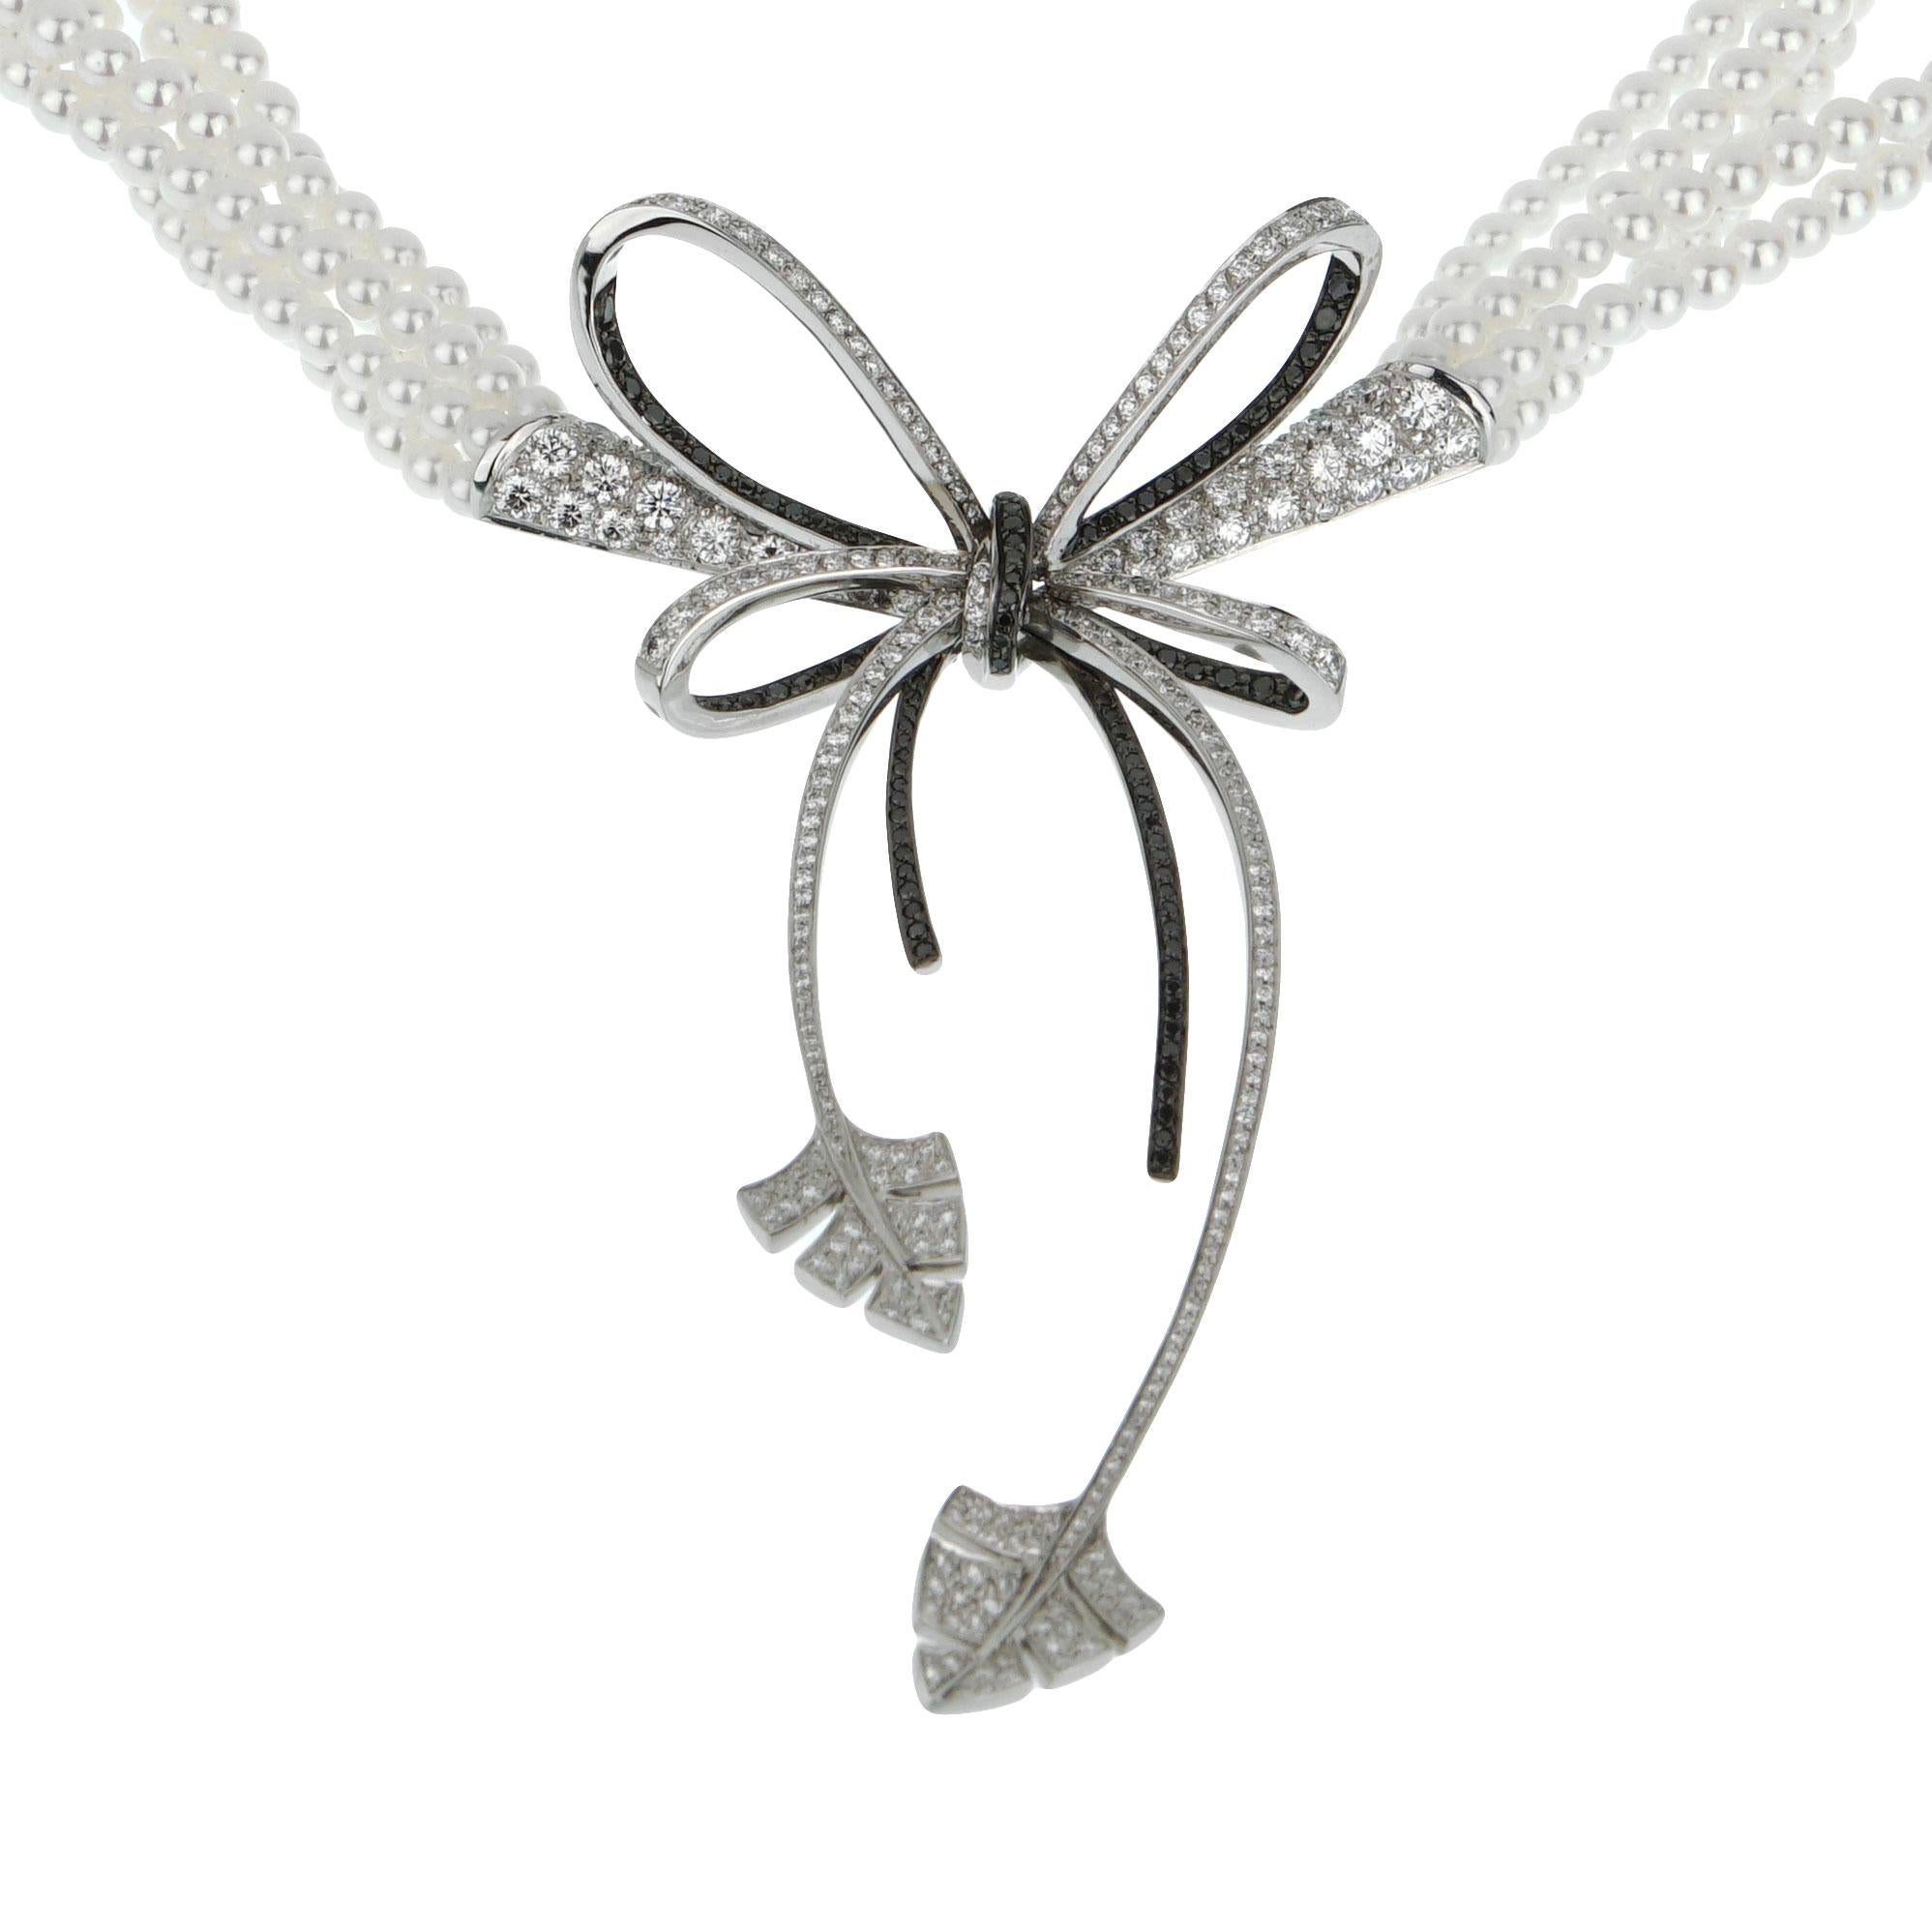 A magnificent brand new Chanel pearl diamond necklace showcasing a delicate bow incorporating brilliant white and black diamonds in 18k white gold. The necklace is suspended by 5 pearl strands and a matching decorated locking mechanism encased with